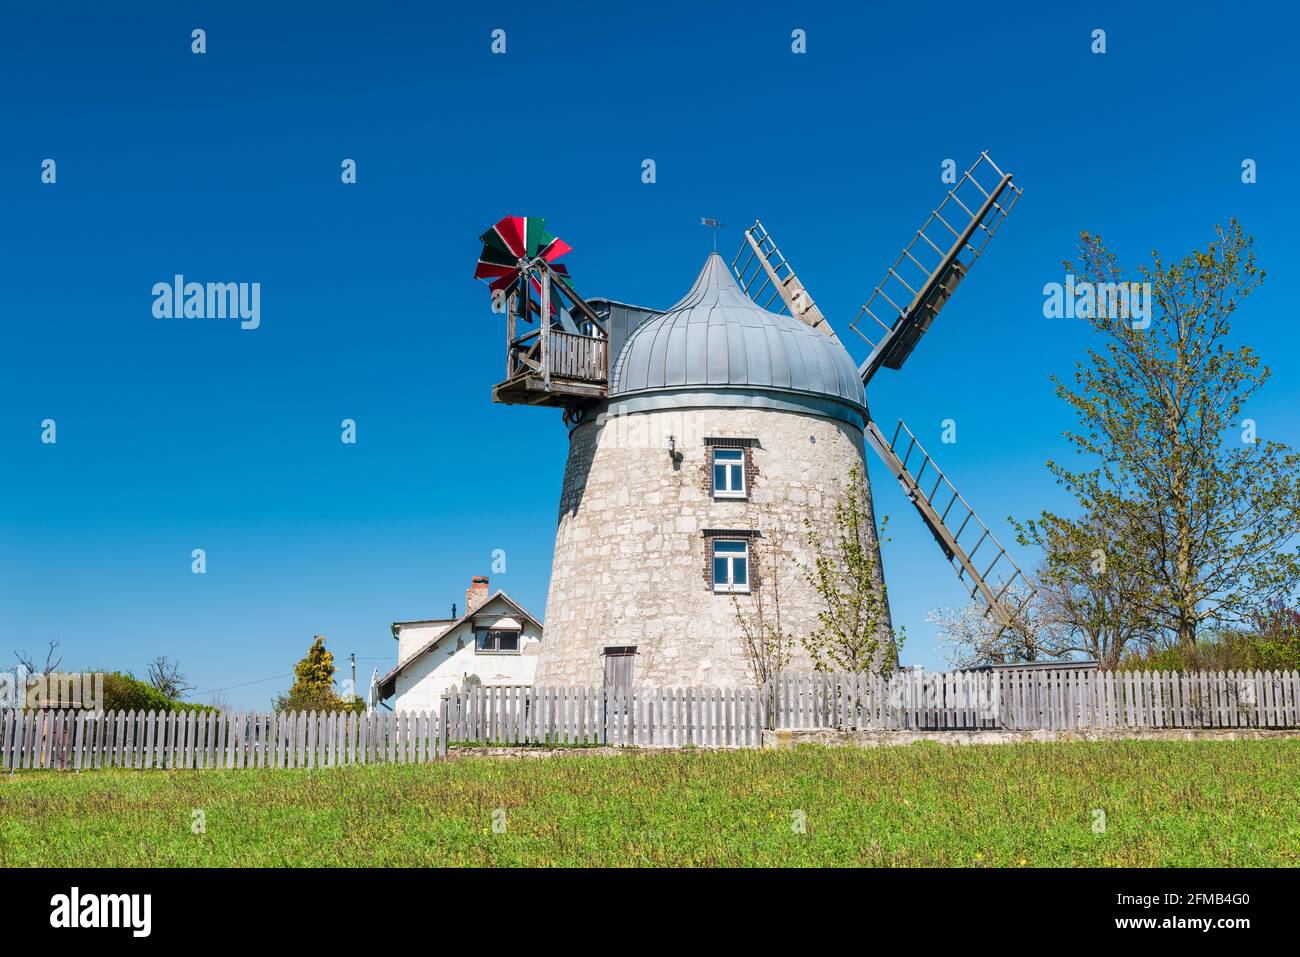 Germany, Saxony-Anhalt, Naumburg, the tower windmill of Tultewitz in spring Stock Photo